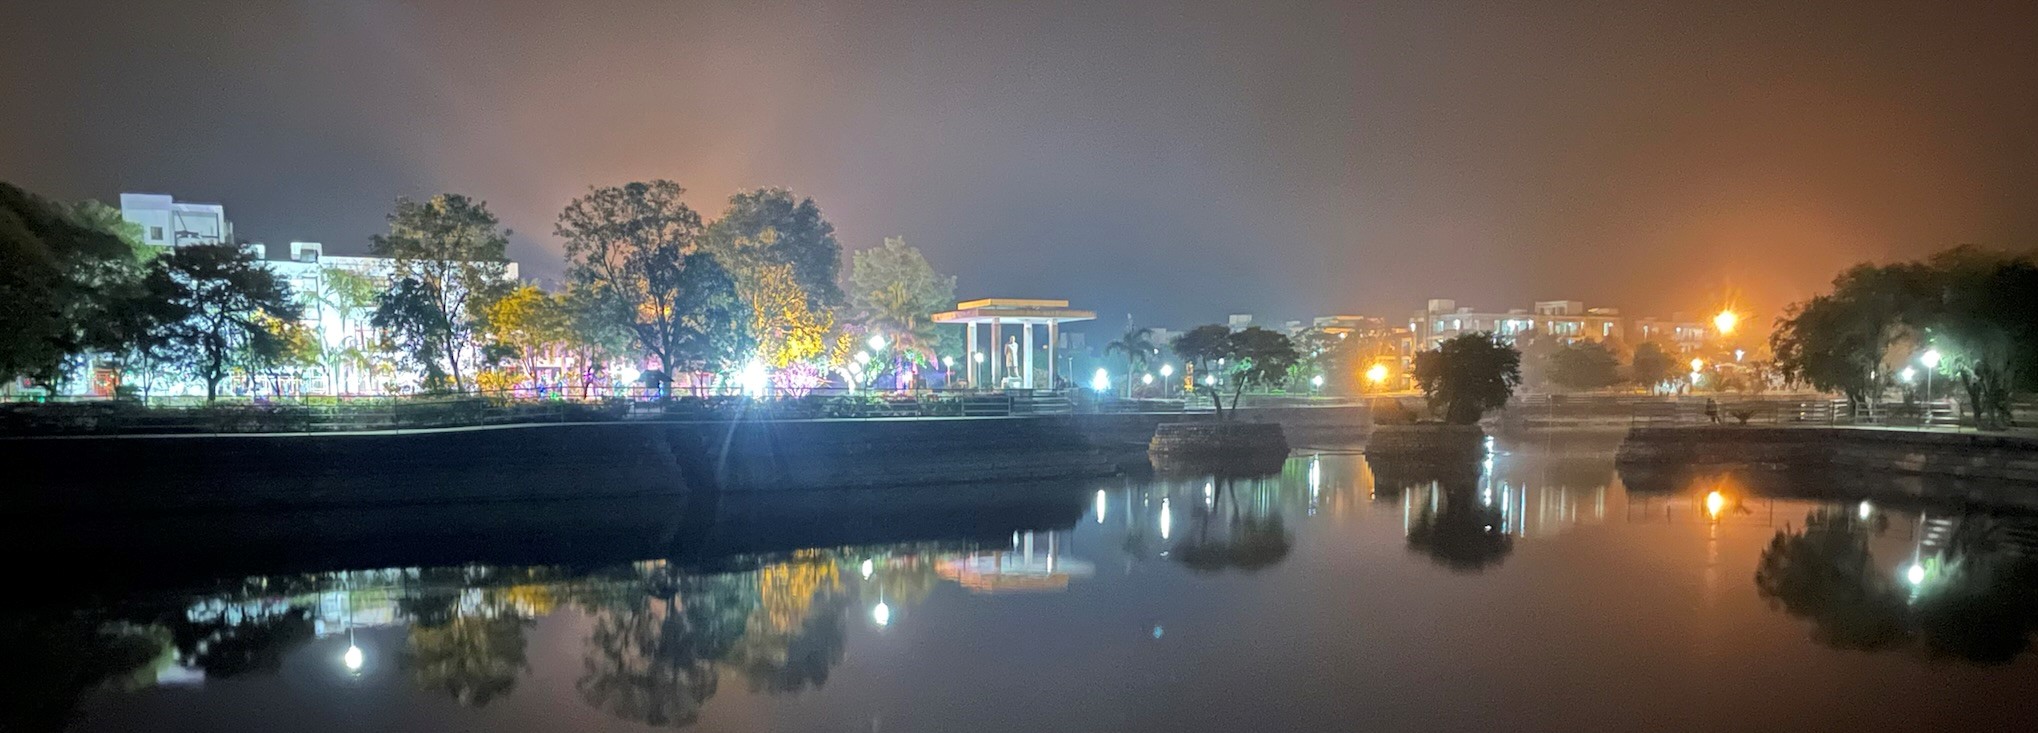 Night View of Lake located in the JUET Campus